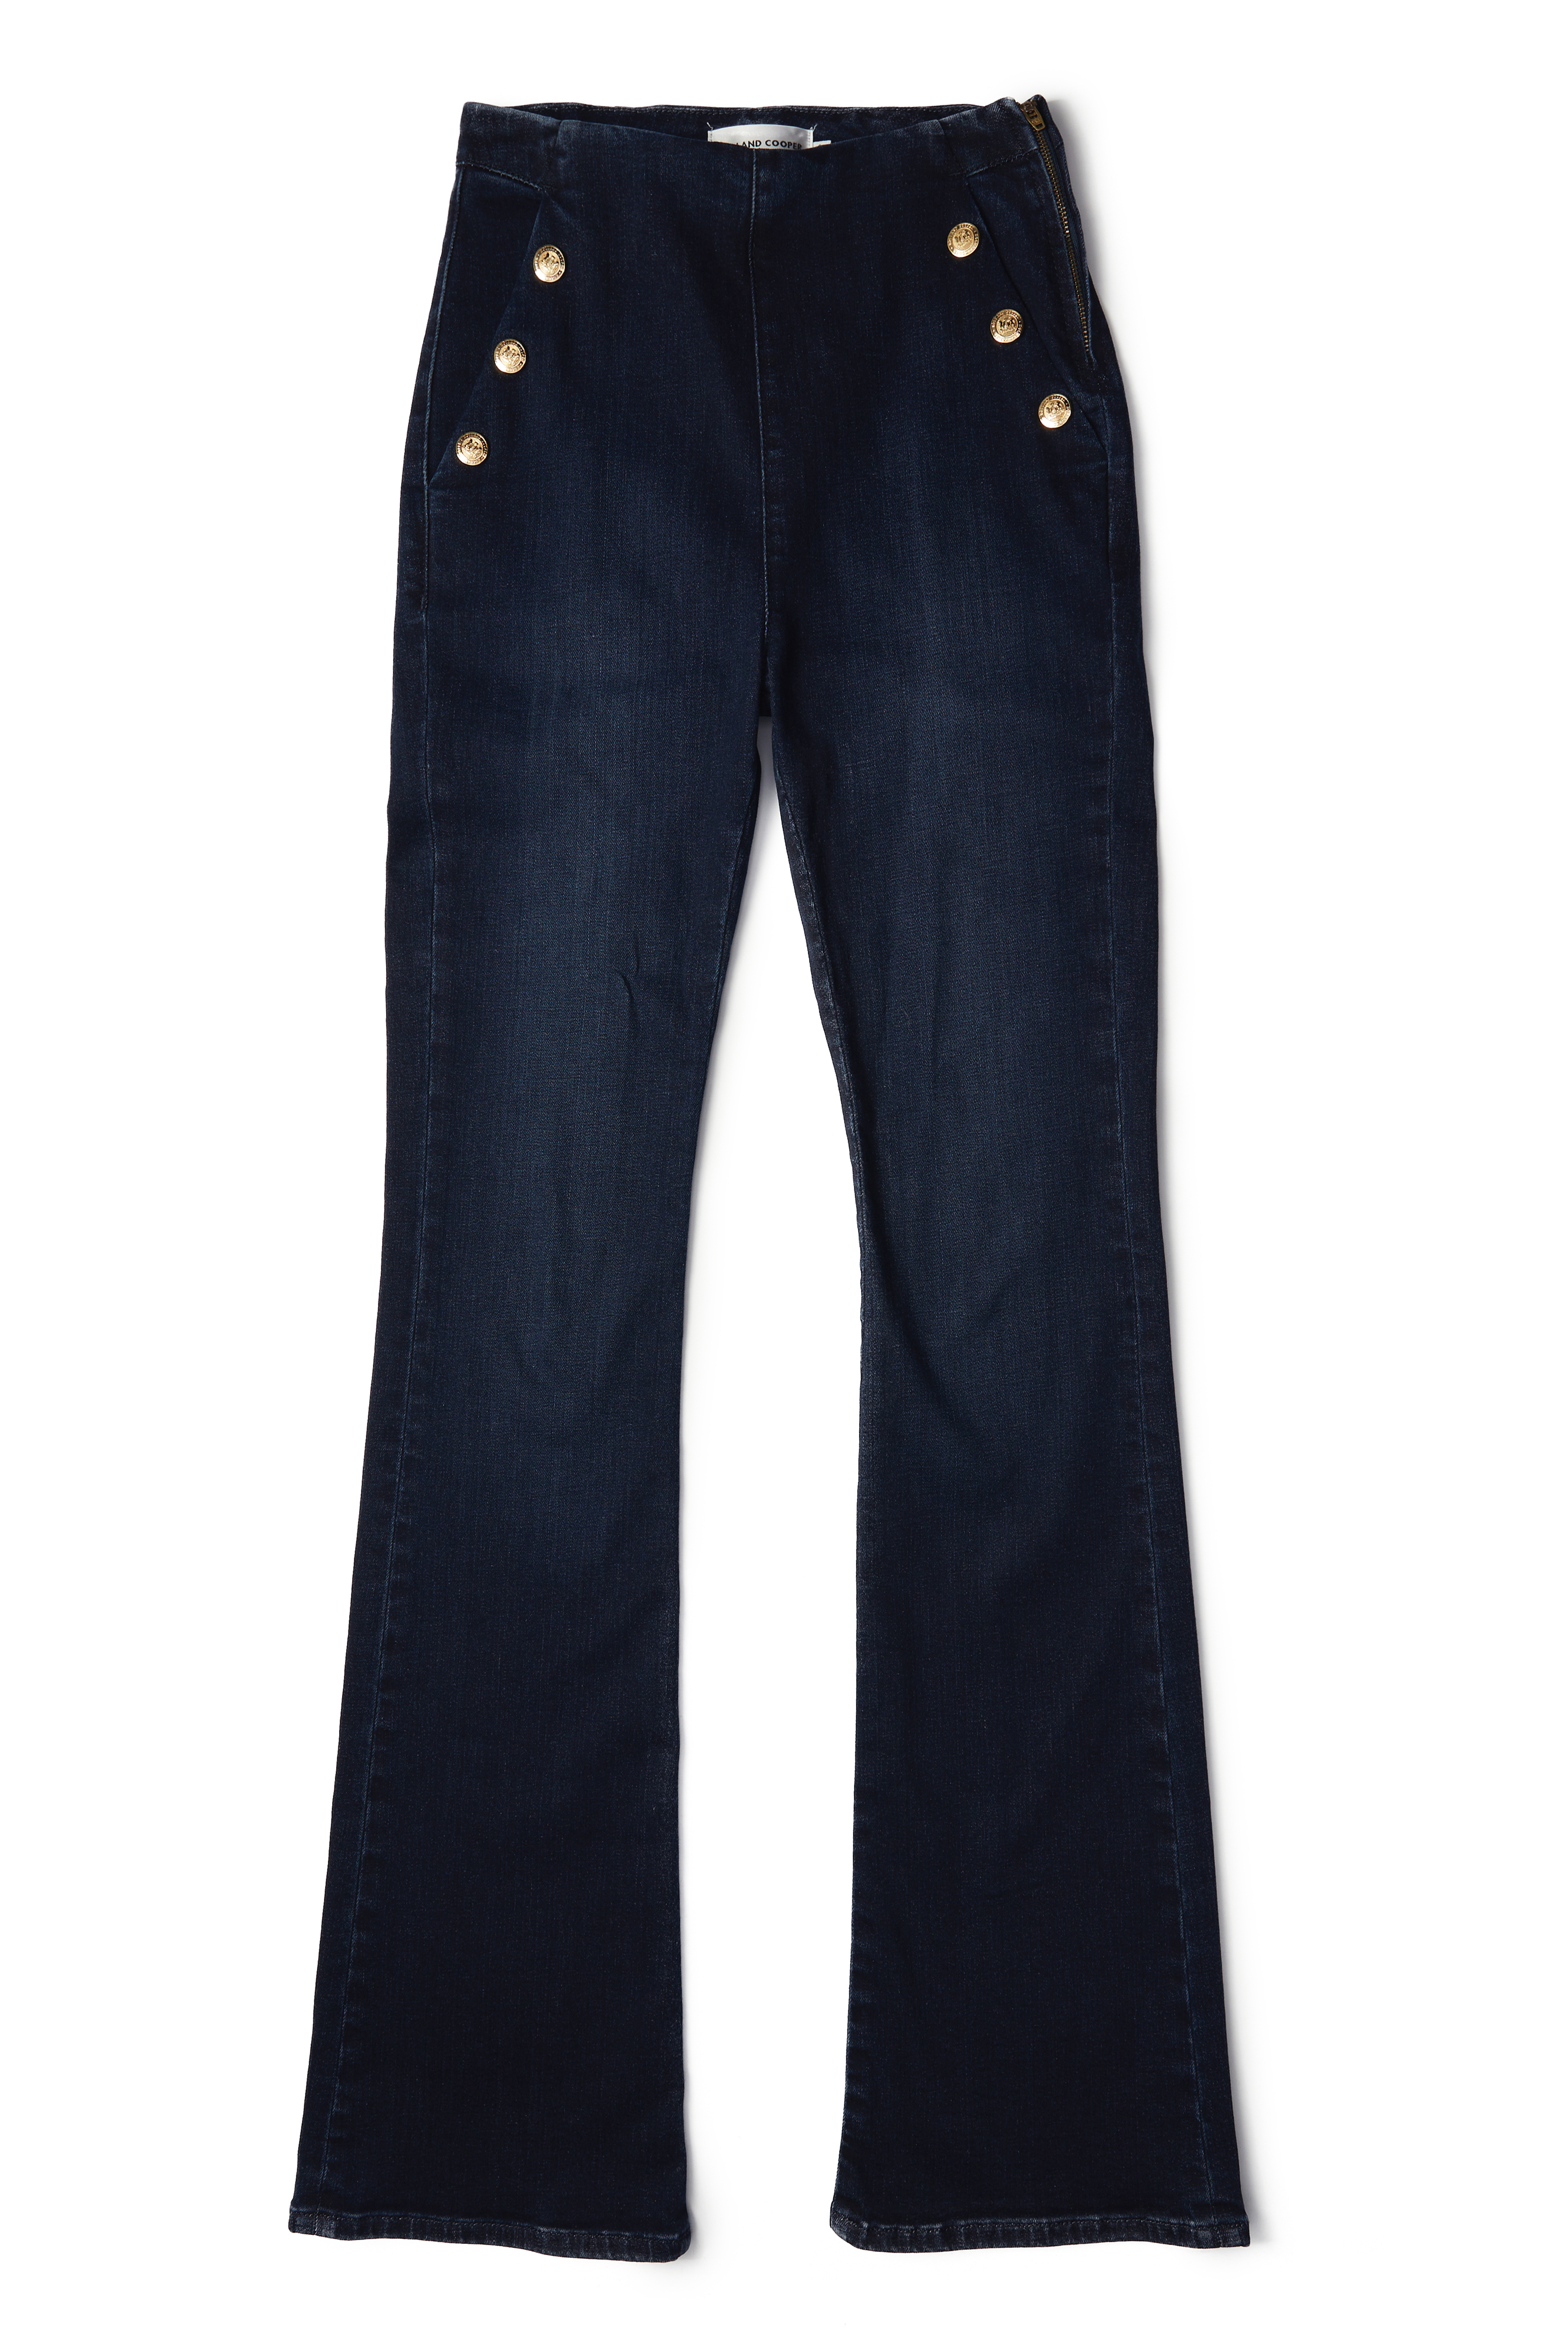 Petite Jeans – Tagged filter-type: High Rise– Holland Cooper ®